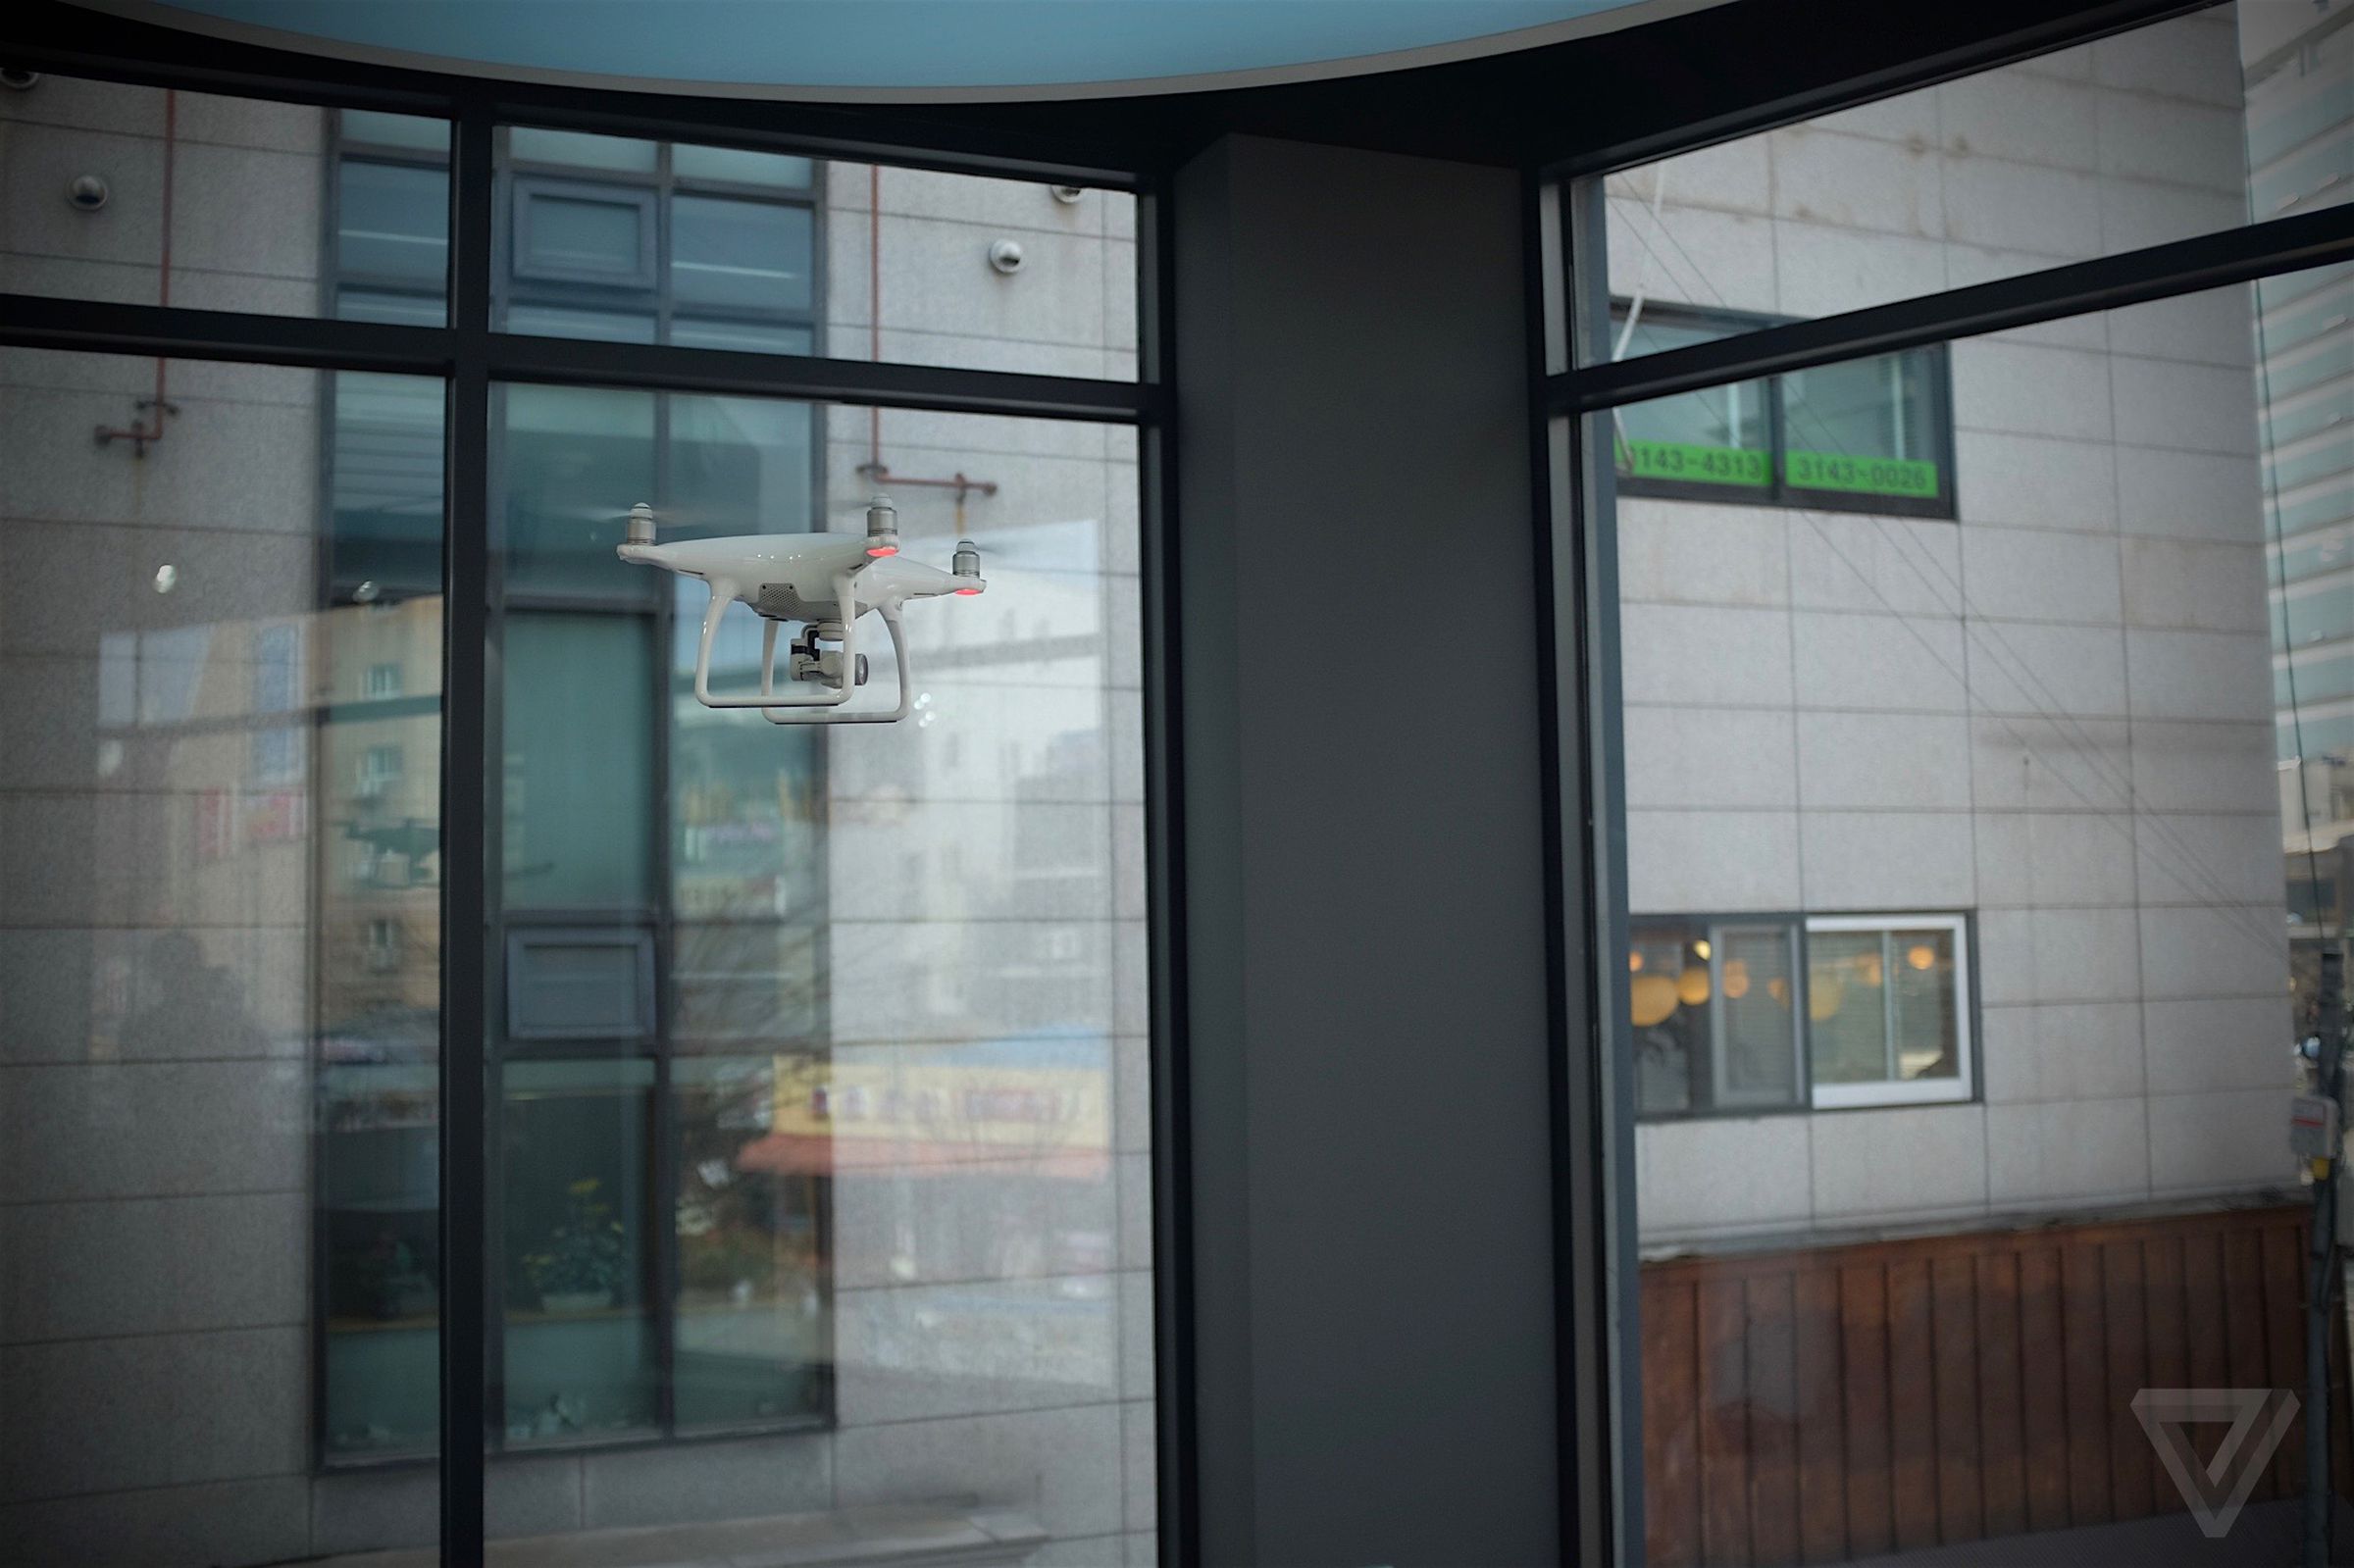 Photos from DJI's flagship store in Seoul